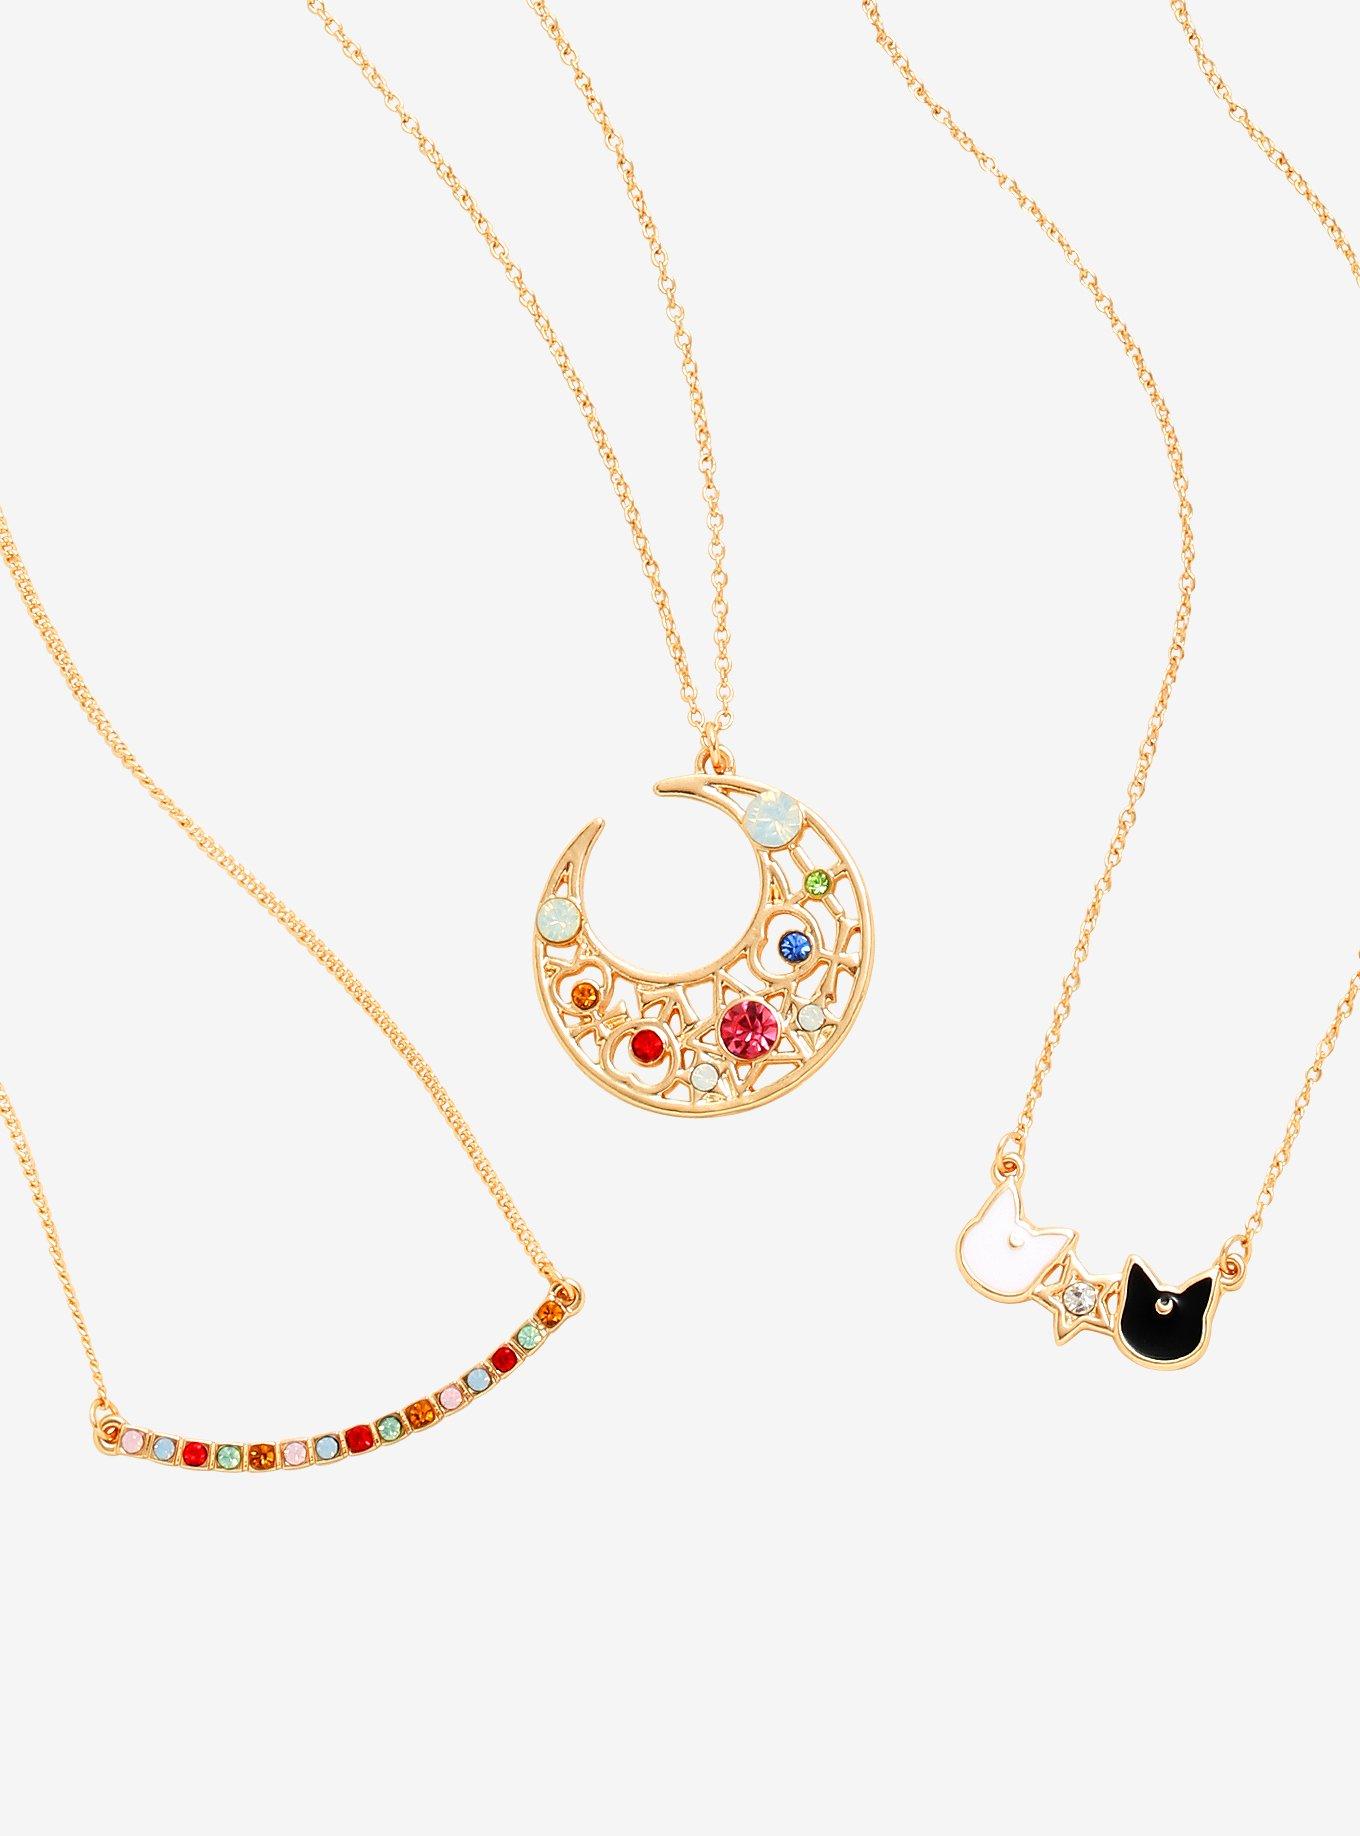 Sailor Moon Crescent Cat Layered Necklace Set - BoxLunch Exclusive, , hi-res